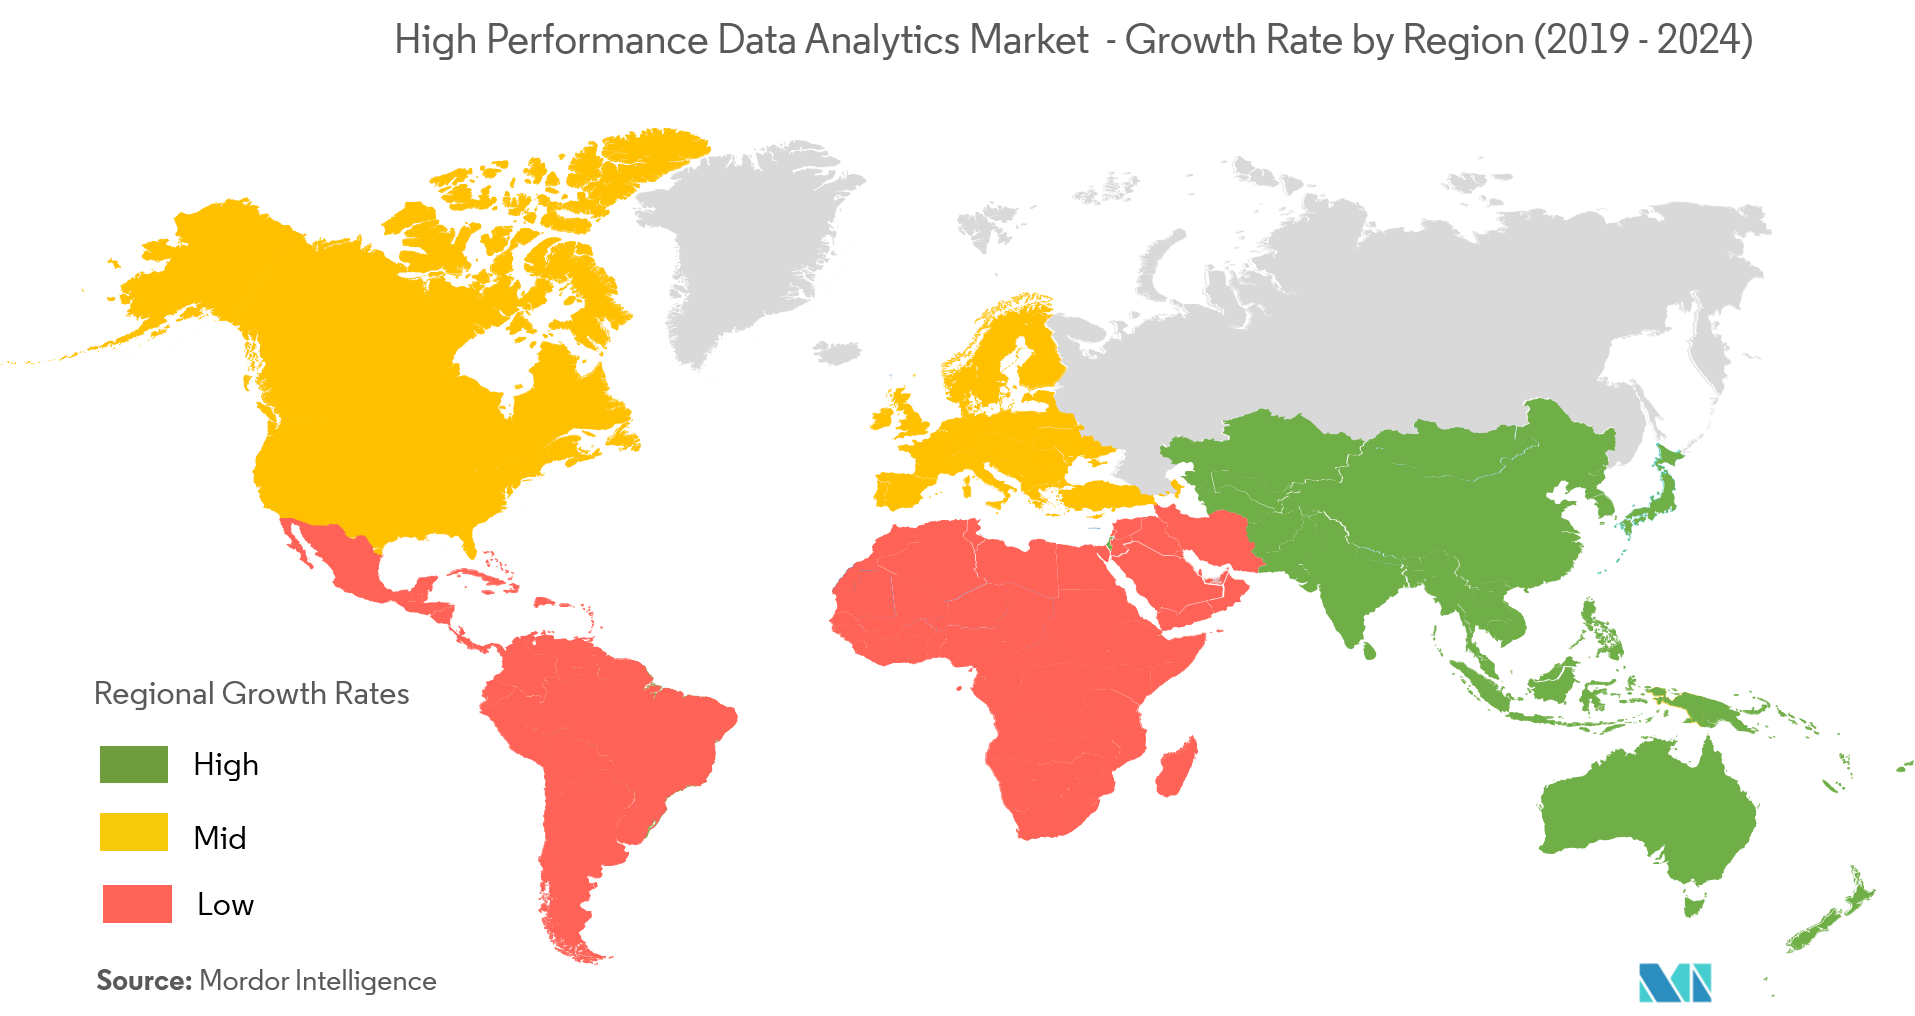 High Performance Data Analytics Market - Growth Rate by Region (2019 - 2024)